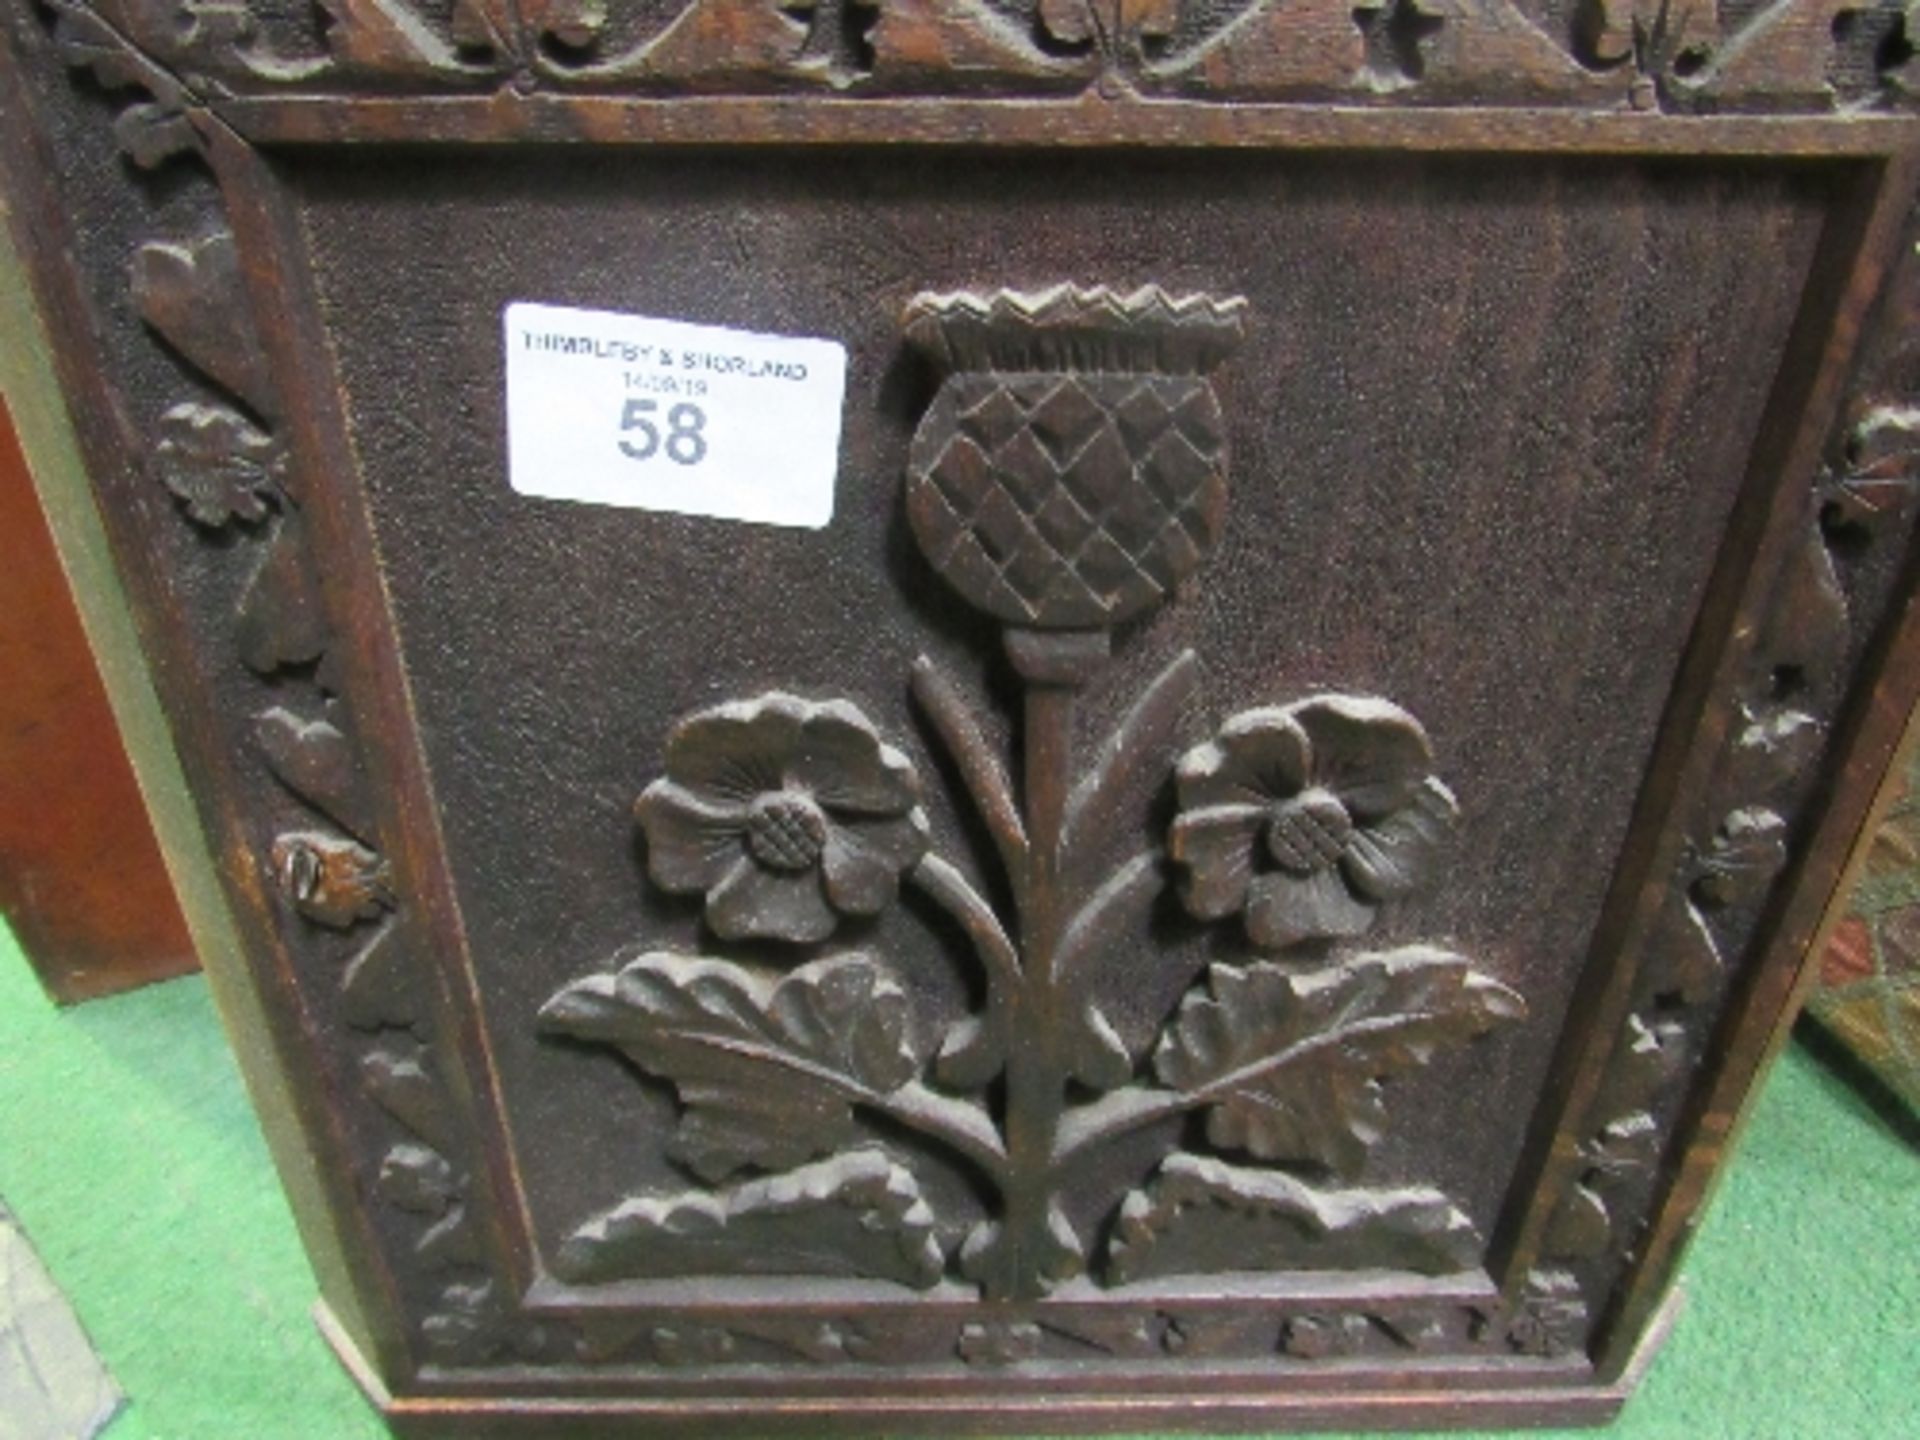 Oak small corner cabinet with thistle emblem to door, height 53cms, width 46cms. Estimate £20-40 - Image 2 of 3